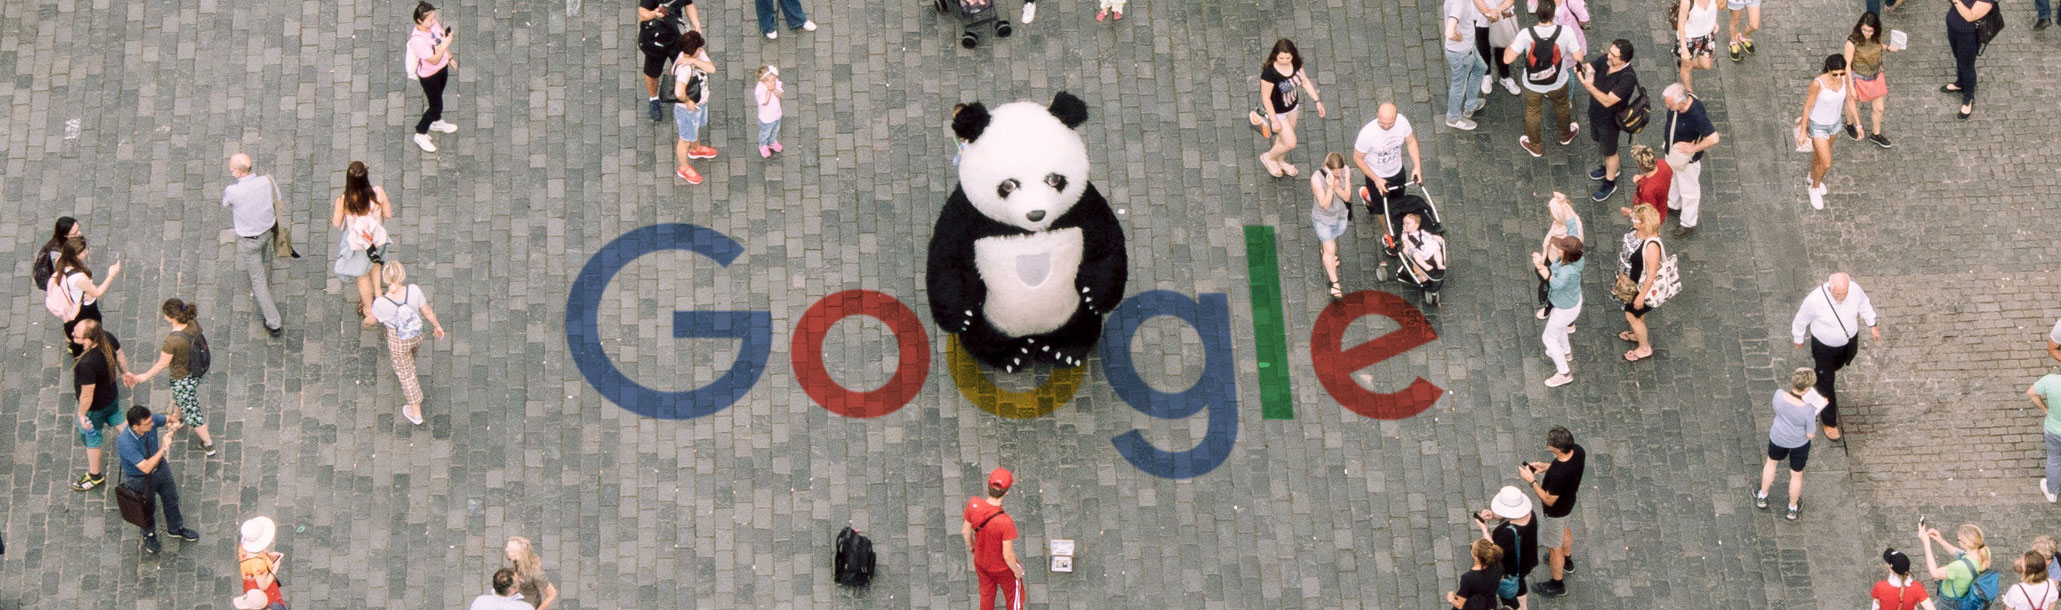 A panda standing in a crowded public space, and the Google logo has been painted on the cobblestones beneath its feet